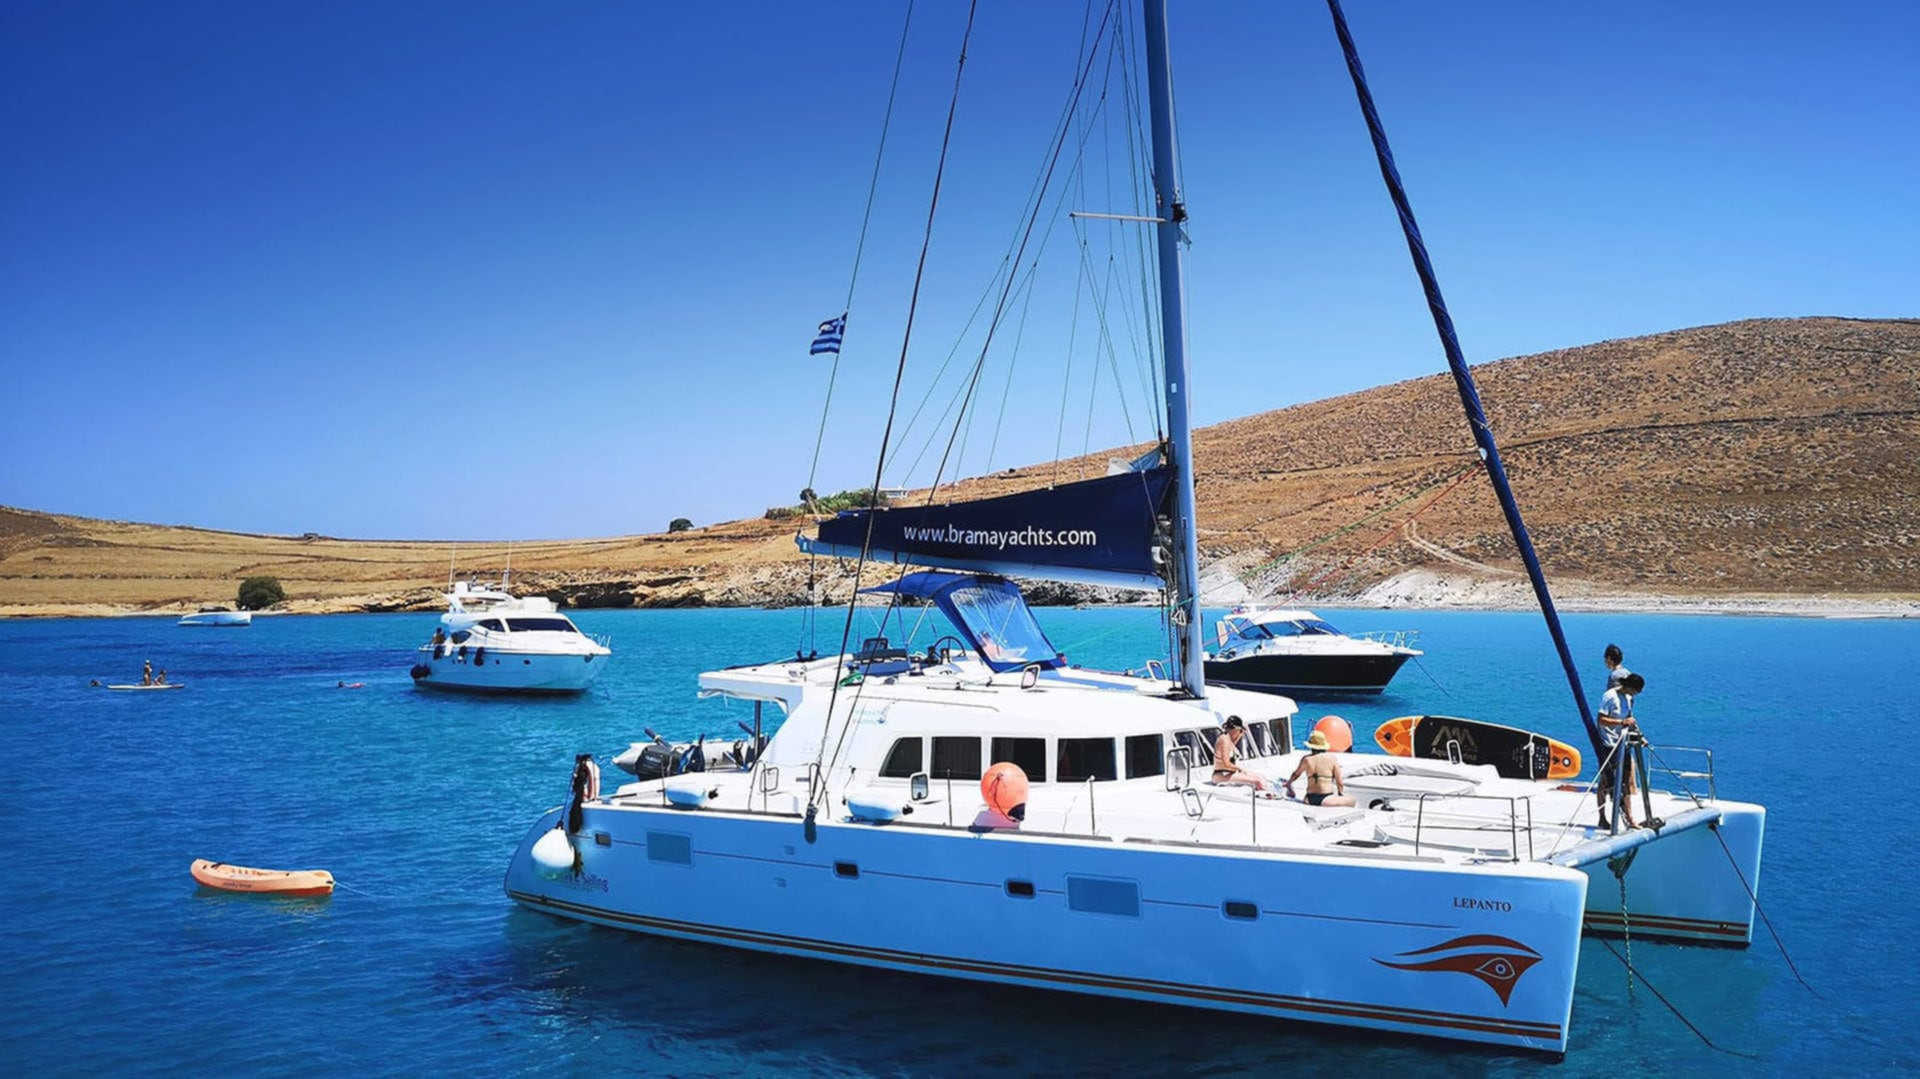  	 	   		Paros Private Full Day Cruise 		 		 Discover the island’s beauties.  Explore more 		 	   	  		 		 Book now 	 	  	  			 		  		 			  		Full dayall inclusive 		 		  		 		 		 			  		max12 persons 		 		   		 		 		 			  		 from€ 2300up to 6 guests 		 		     	 	    